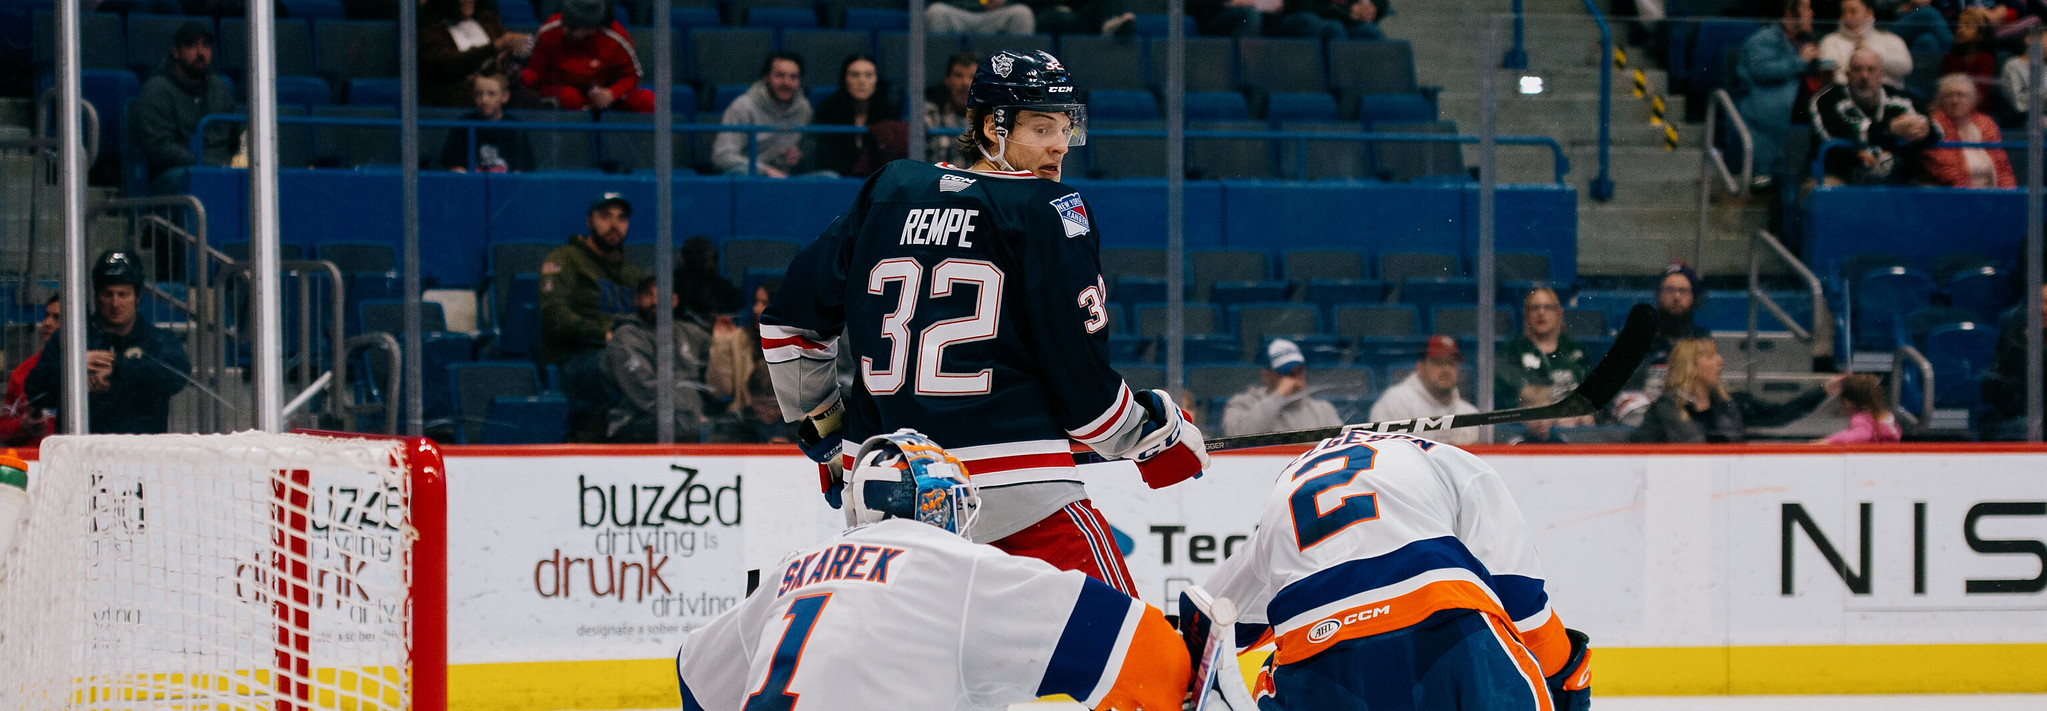 PRE-GAME REPORT: WOLF PACK VISIT ISLANDERS IN LATEST INSTALLMENT OF ‘BATTLE OF CONNECTICUT’